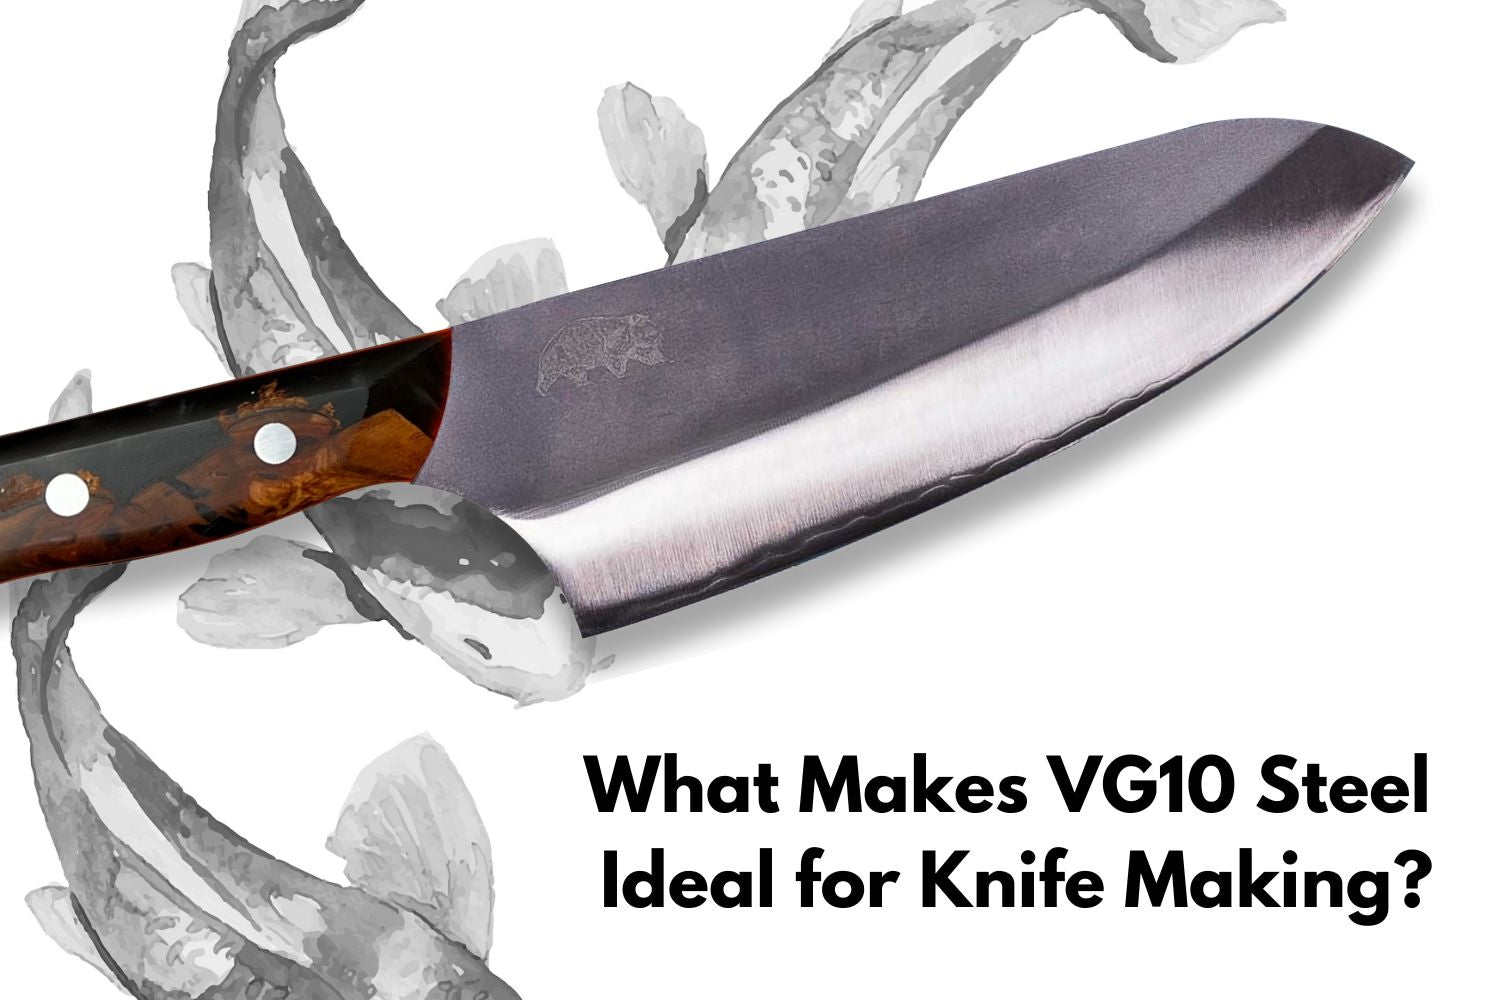 The Best Types of Steel for Knifemaking